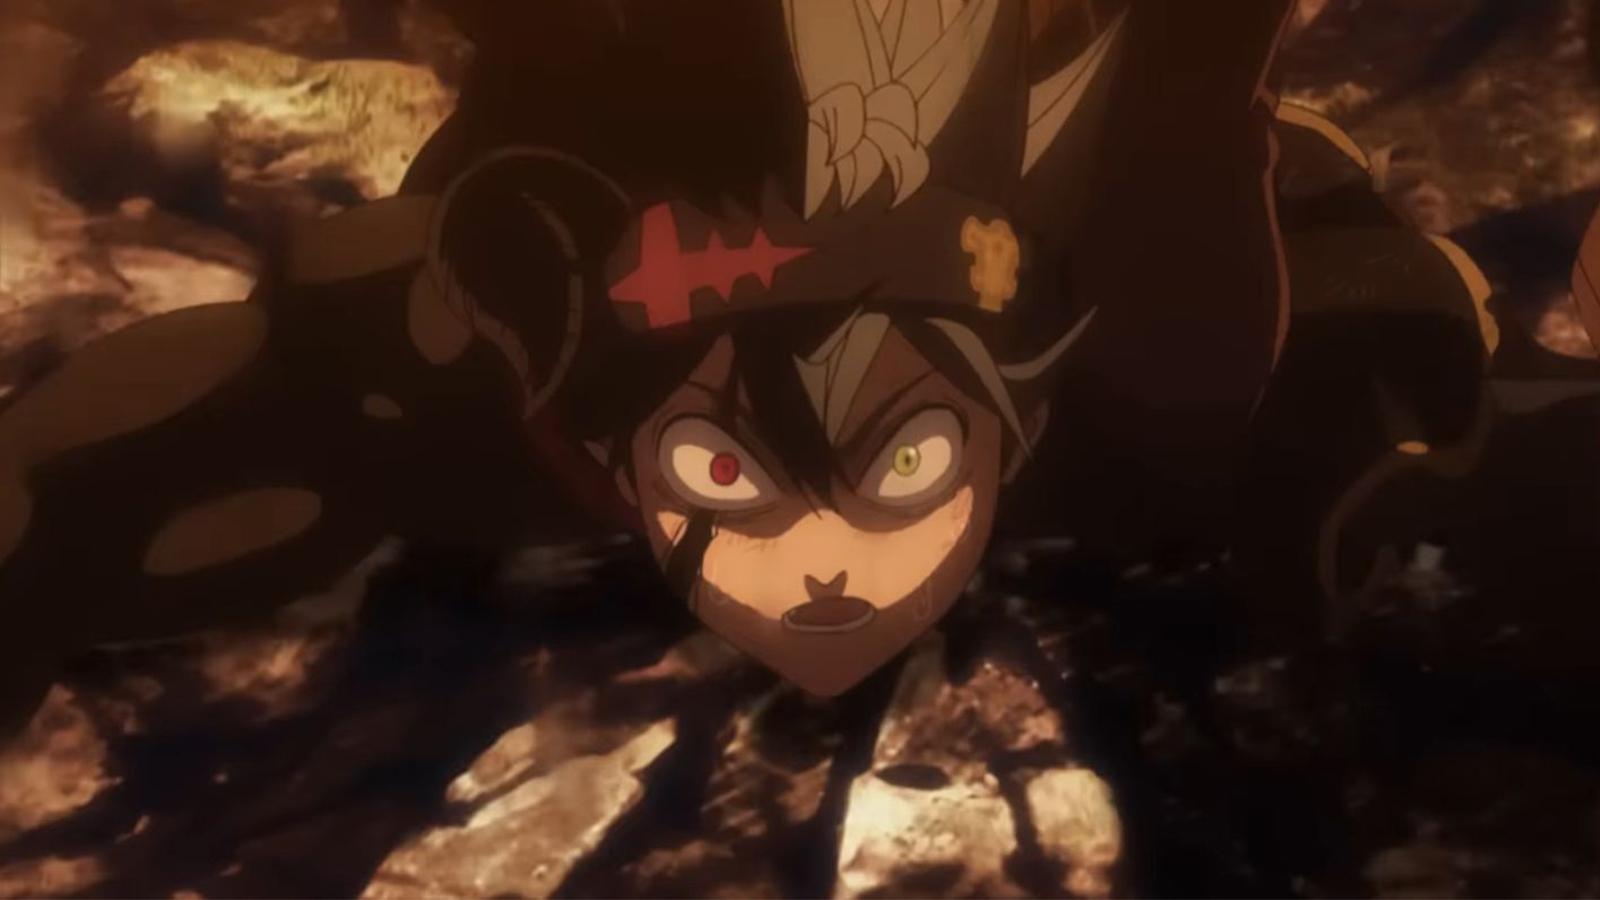 Black Clover season 5: Expected release window, what to expect